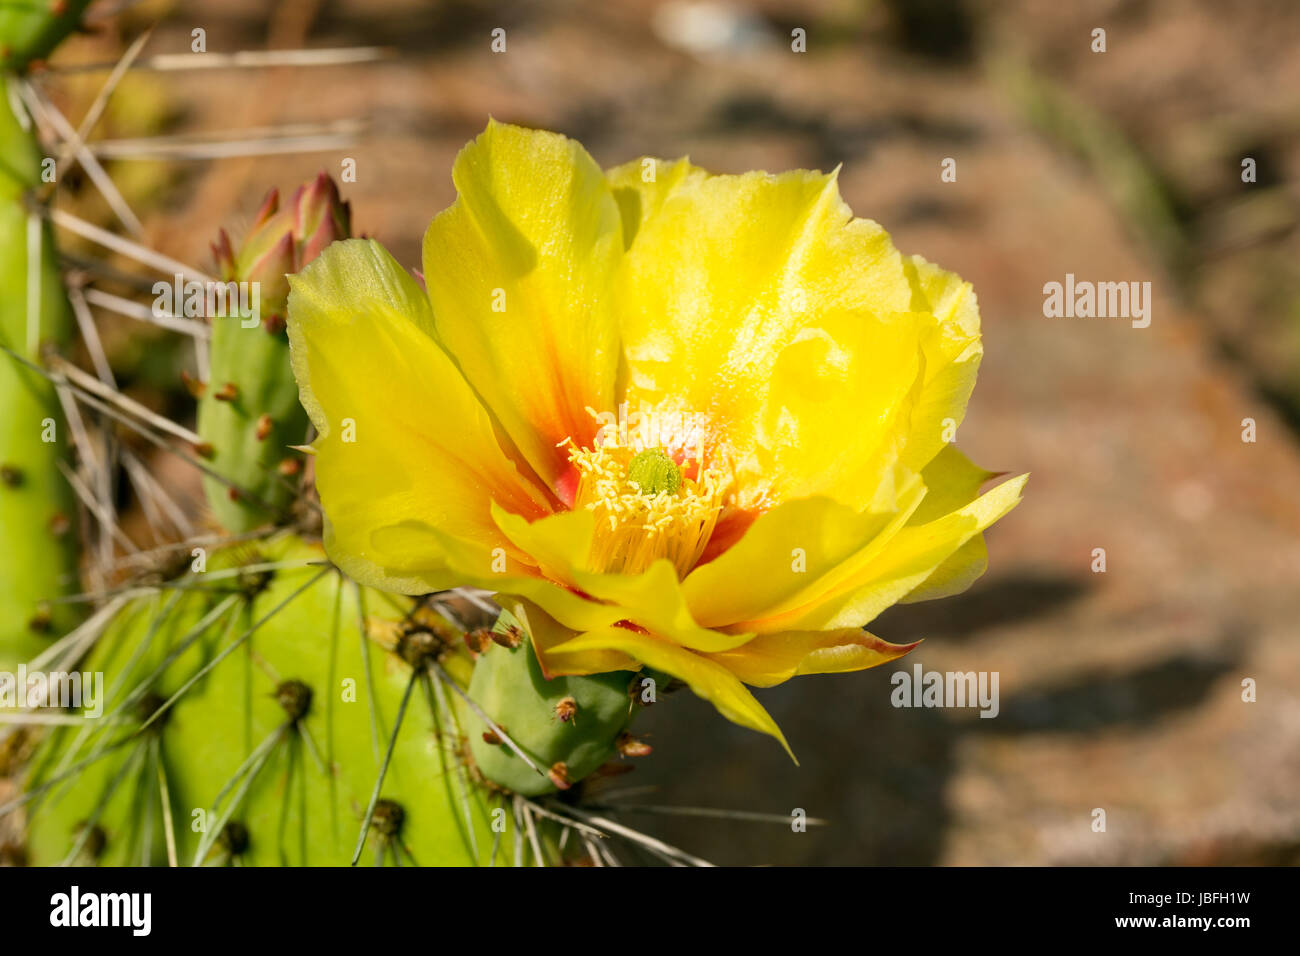 Opuntia phaeacantha blossomed in yellow colors Stock Photo